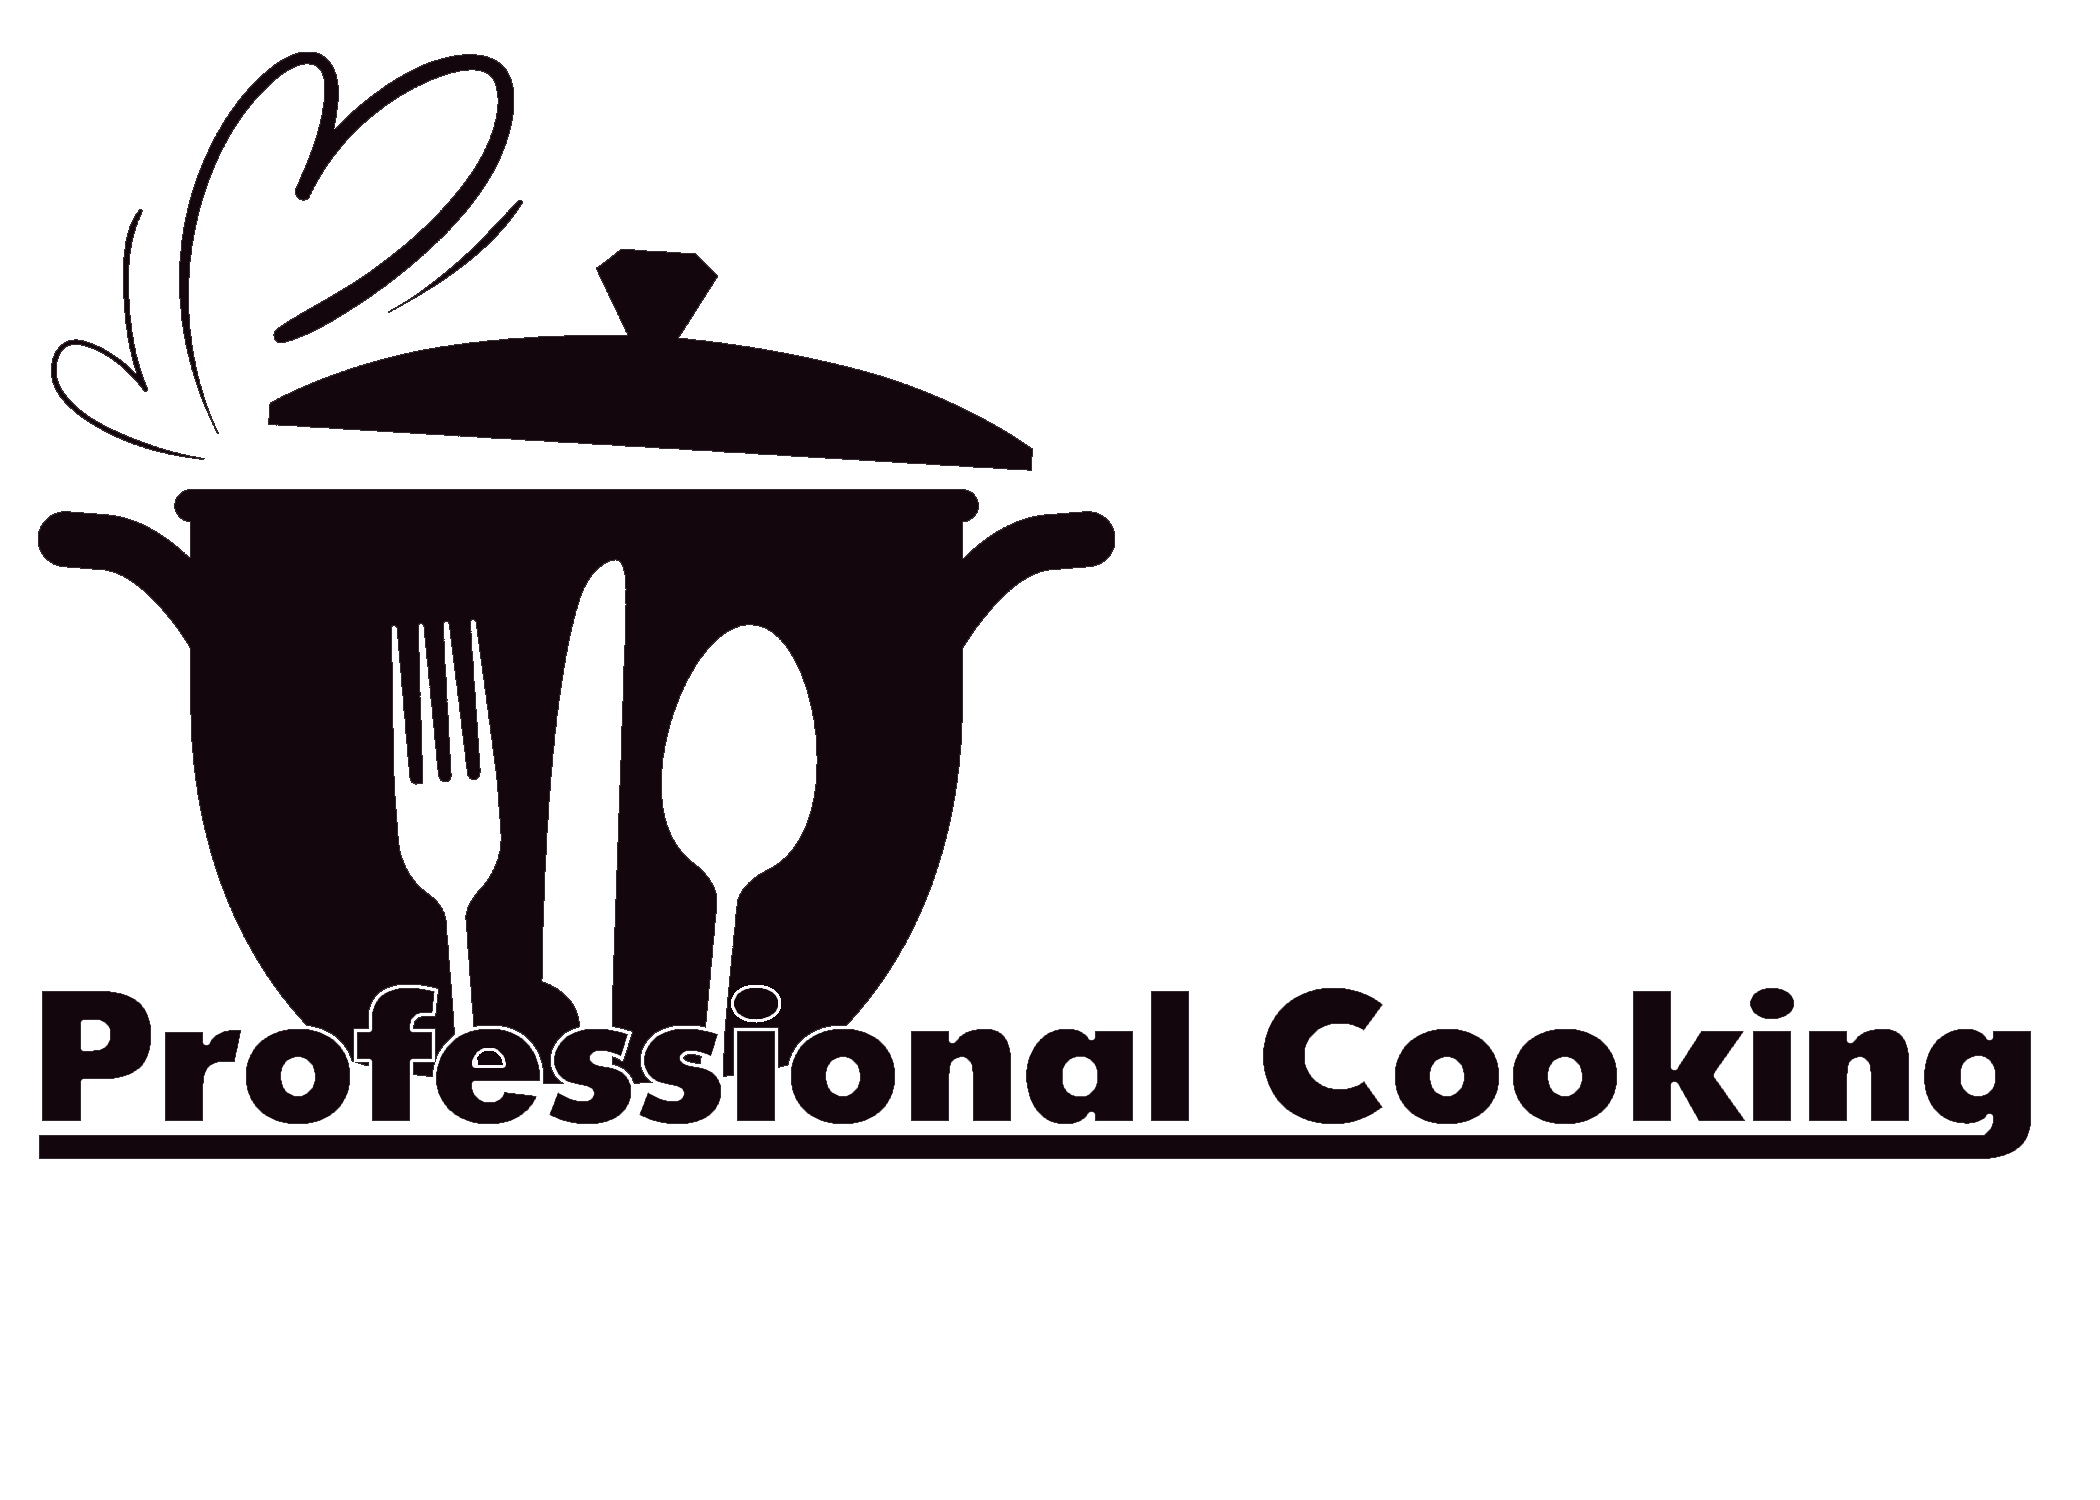 Cooking Logo - Professional Cooking - Madison-Oneida Board of Cooperative ...